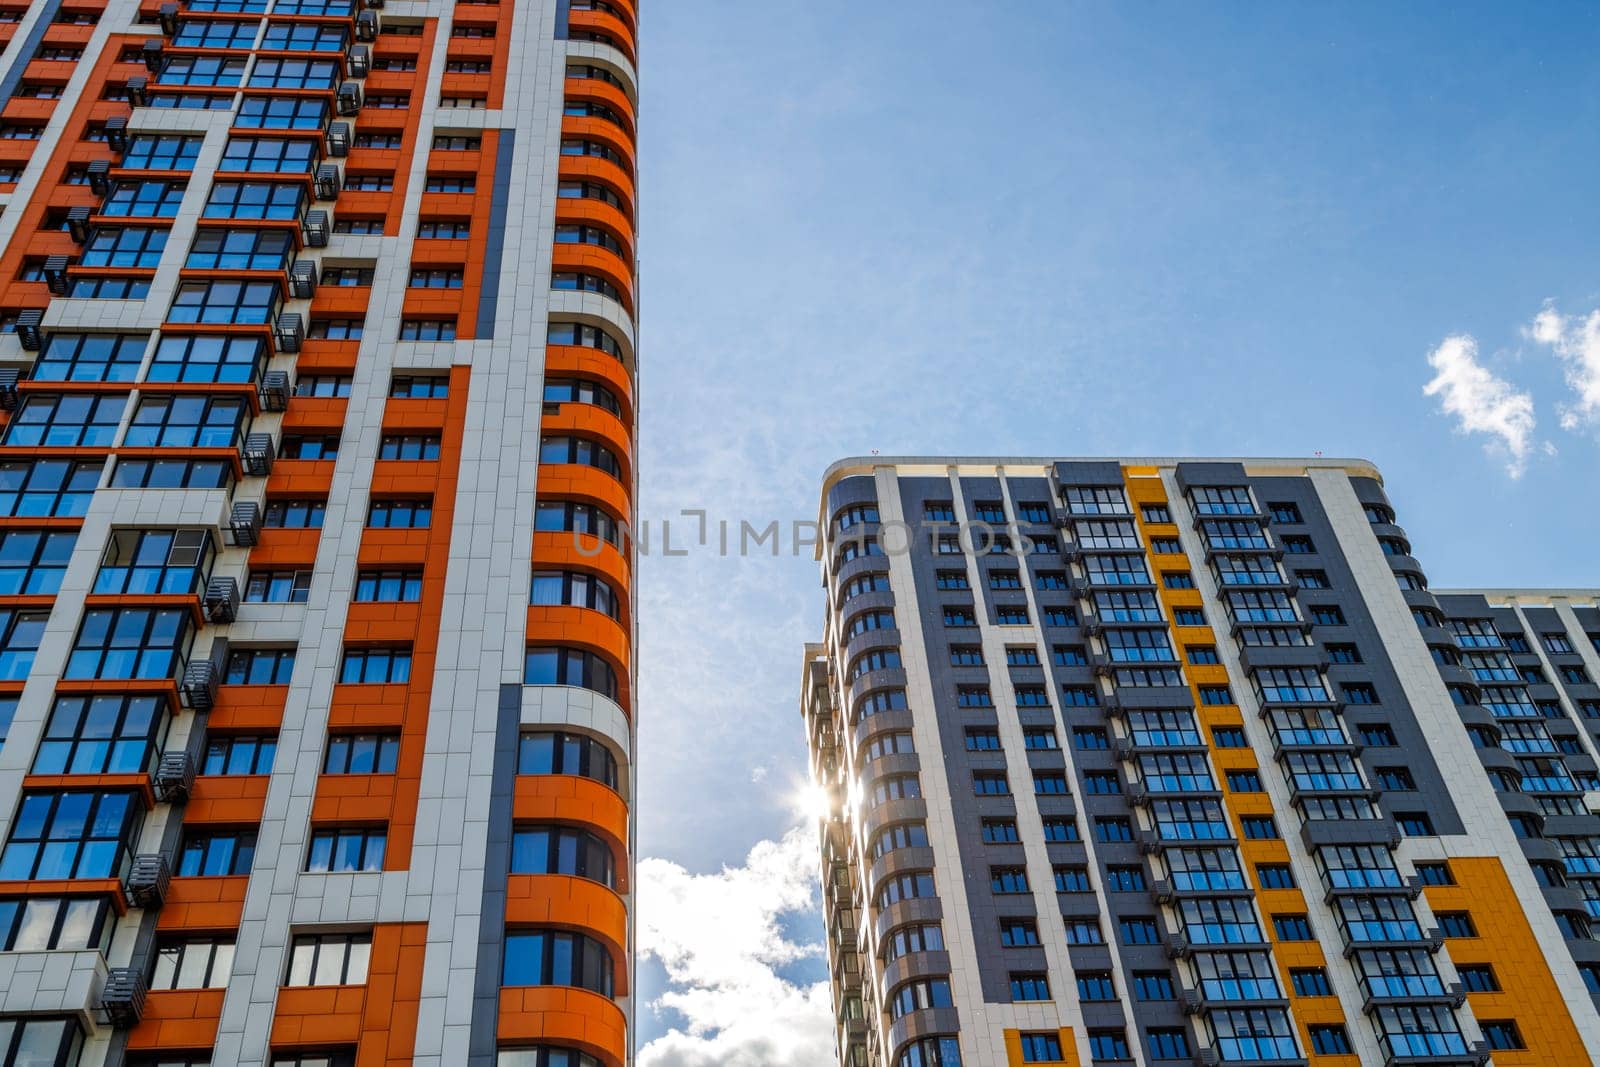 freshly built high rise apartment buildings on blue sky background with white clouds, low angle view